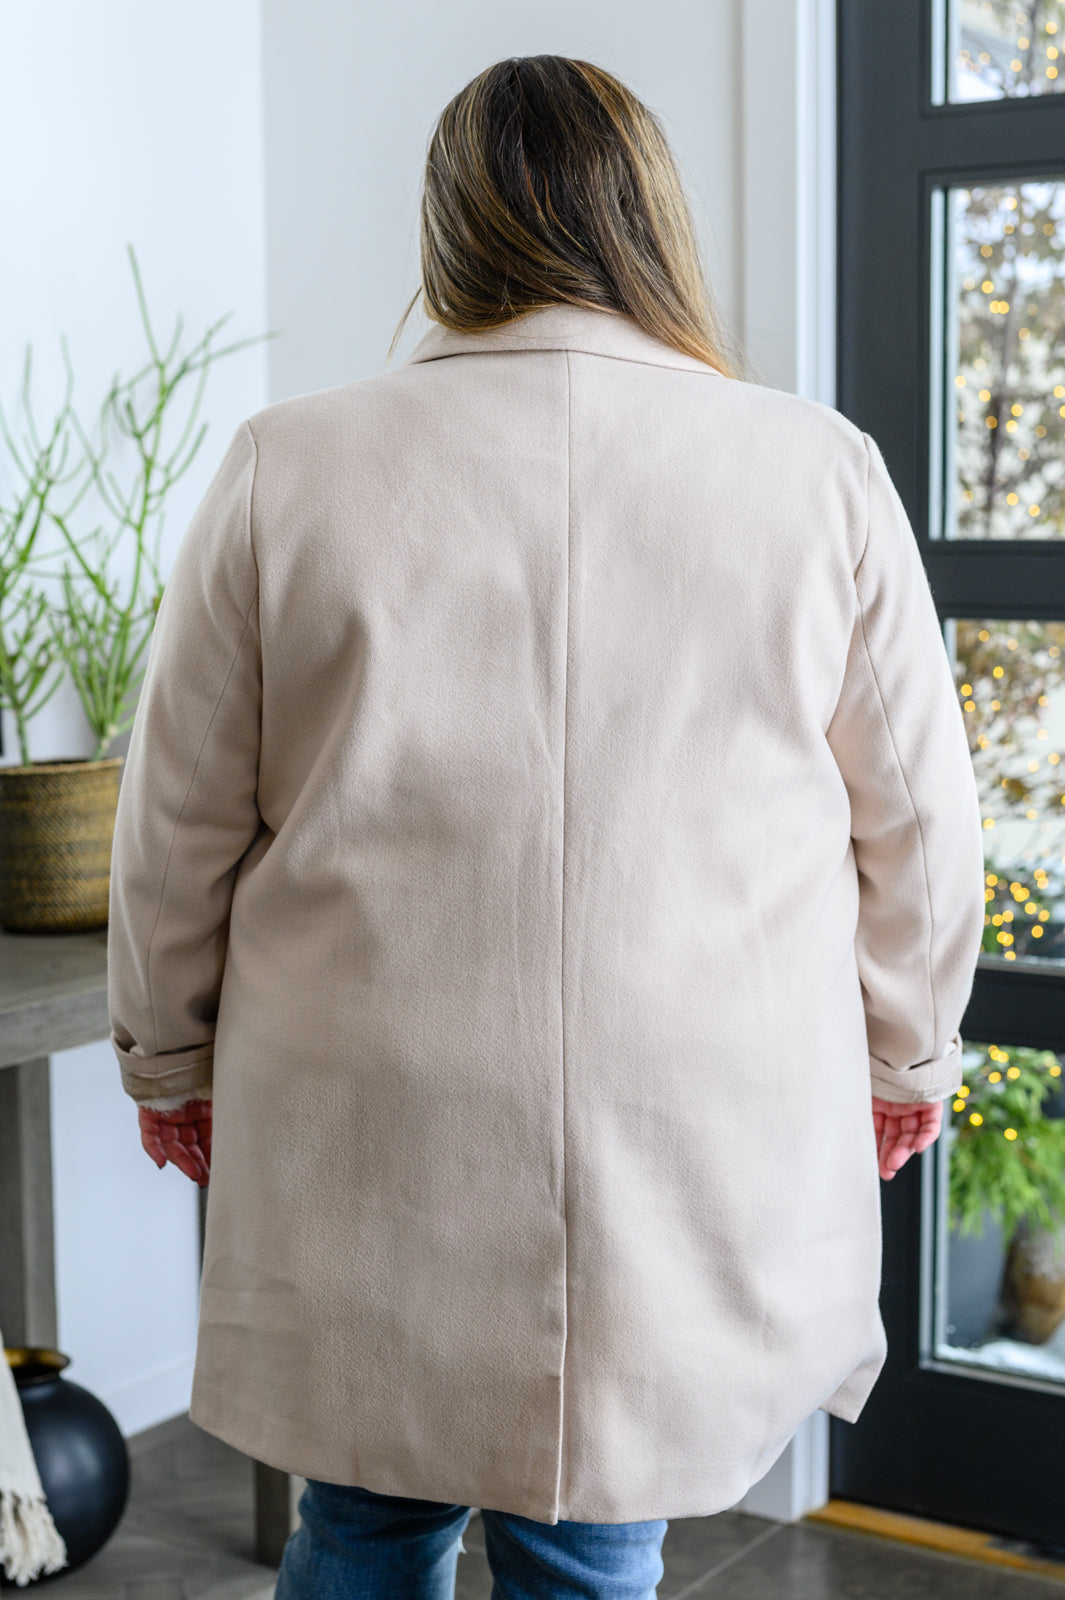 Can't Miss Out Jacket In Beige - 1/5/2023